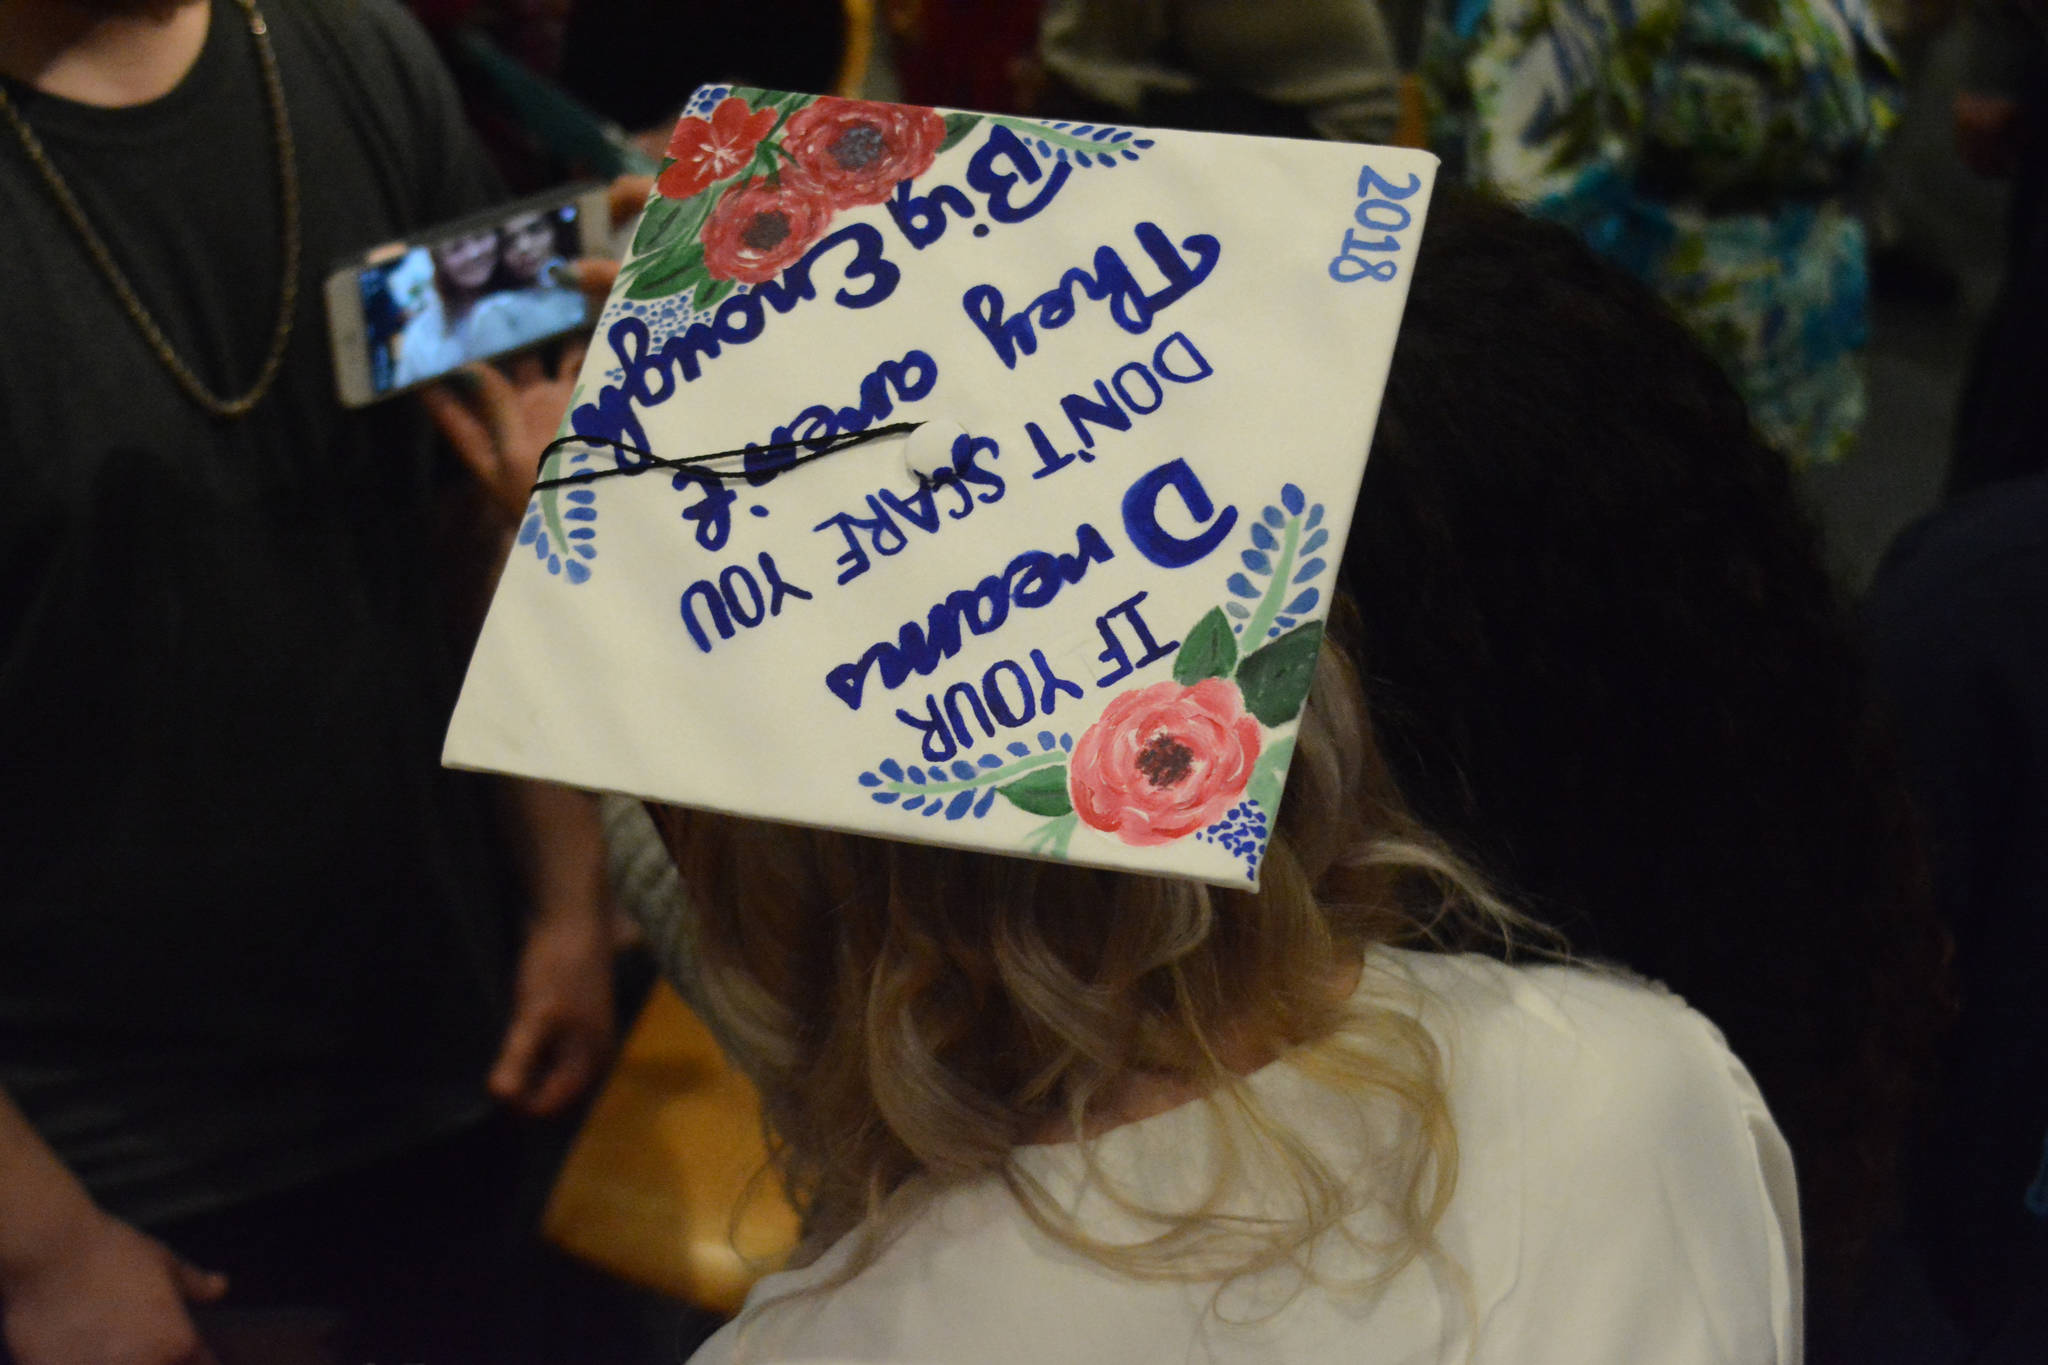 Flex High School graduate Amber Bridgeman’s mortarboard reads “If your dreams don’t scare you they’re not big enough.” Nine students graduated from Flex on Tuesday night, May 22, 2018, at the Alaska Islands and Ocean Visitor Center auditorium, Homer, Alaska. (Photo by Michael Armstrong / Homer News)